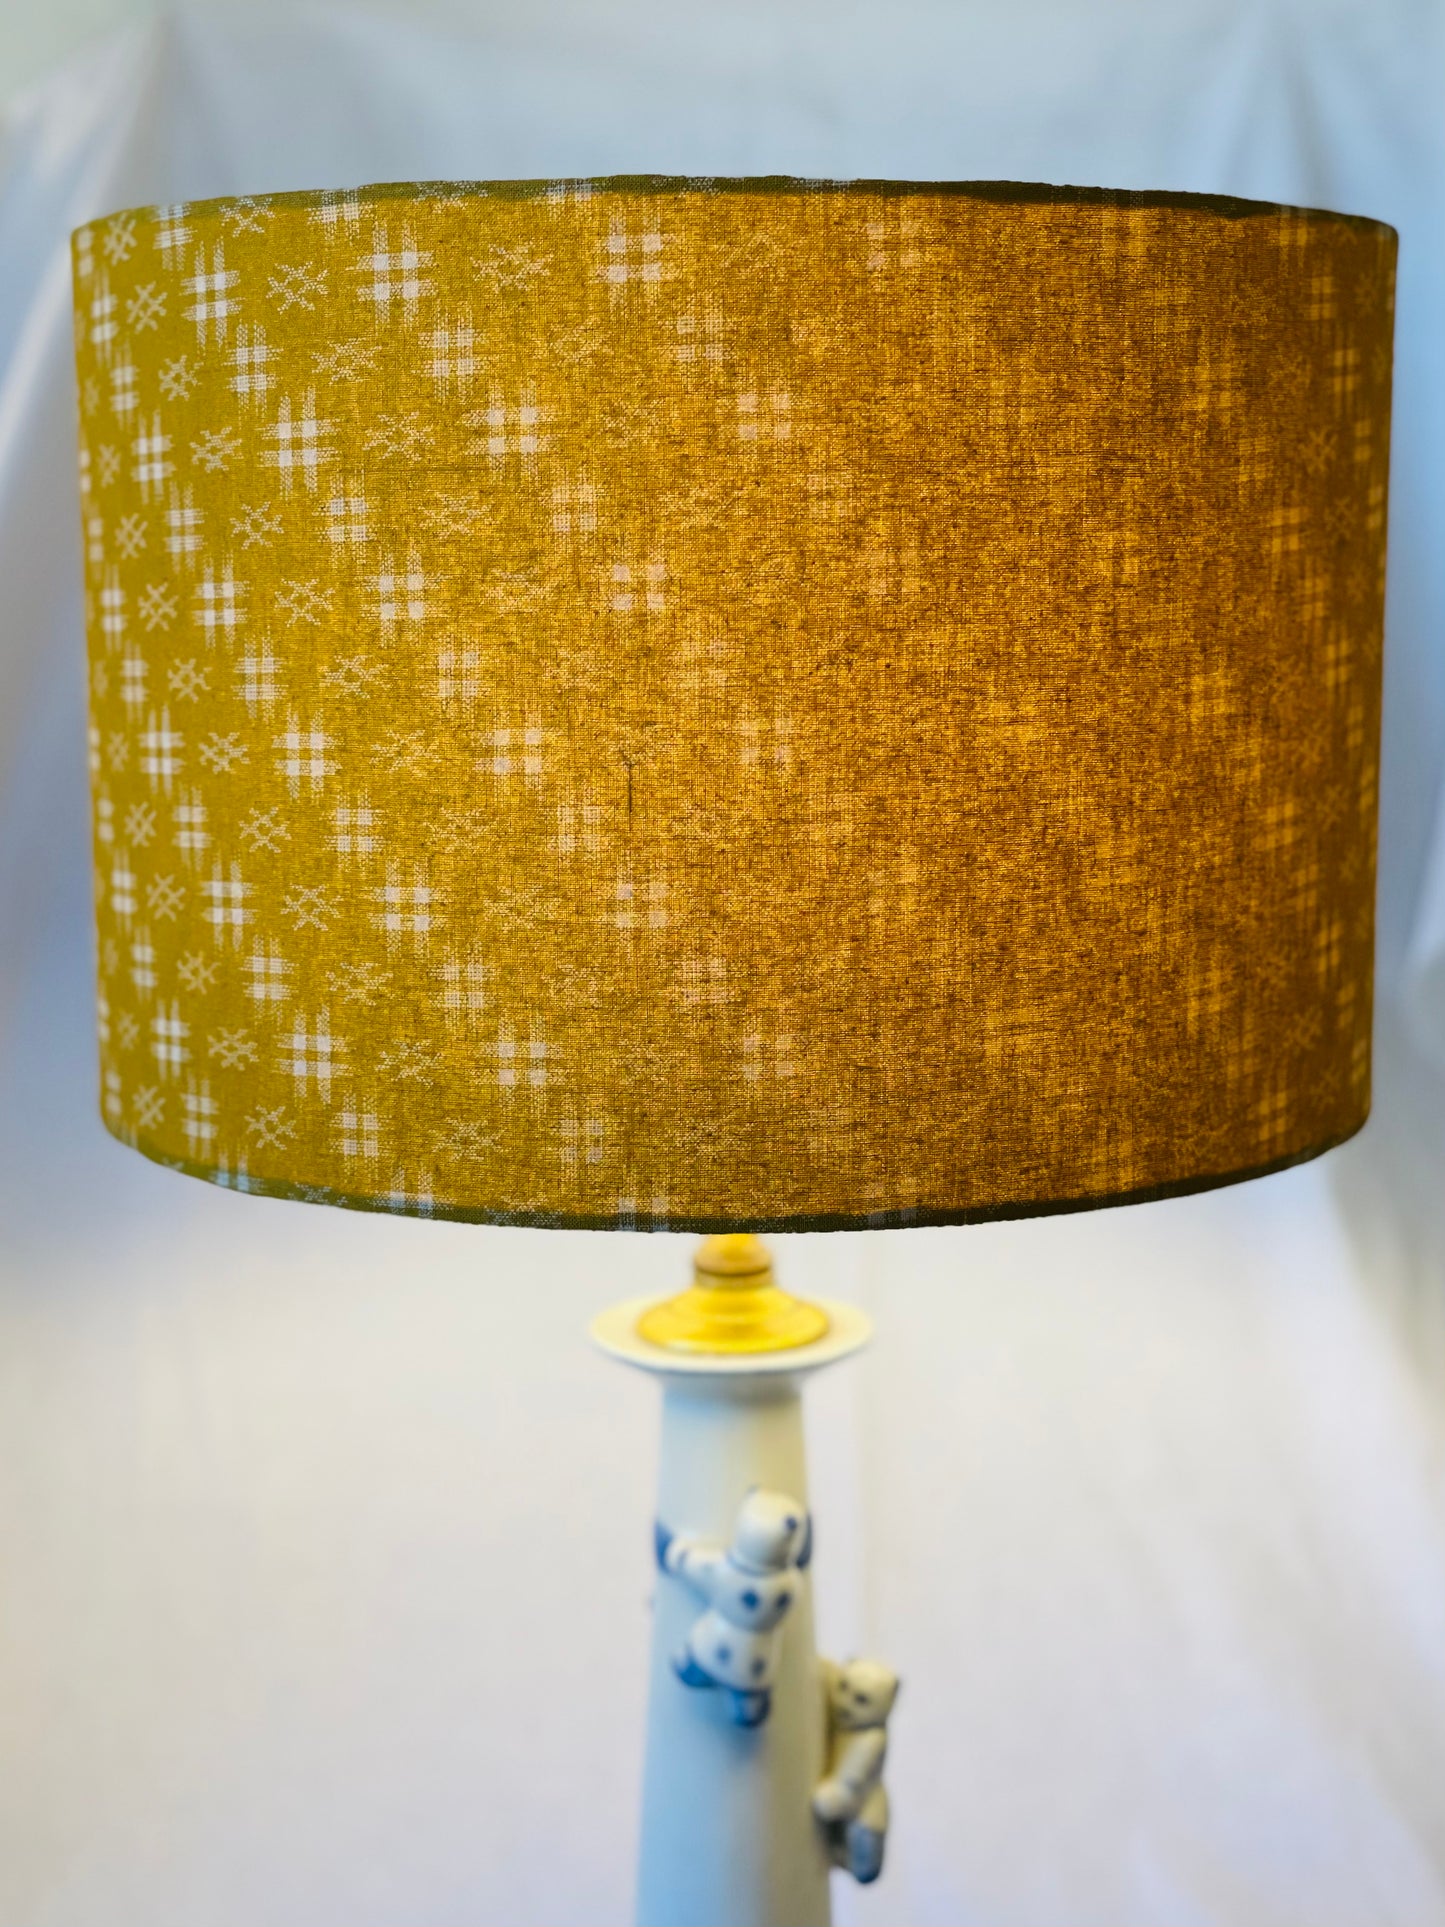 12 Inch Drum Lampshade. Traditional Japanese Design. Harvest Gold with Ecru Hashtag Motif.